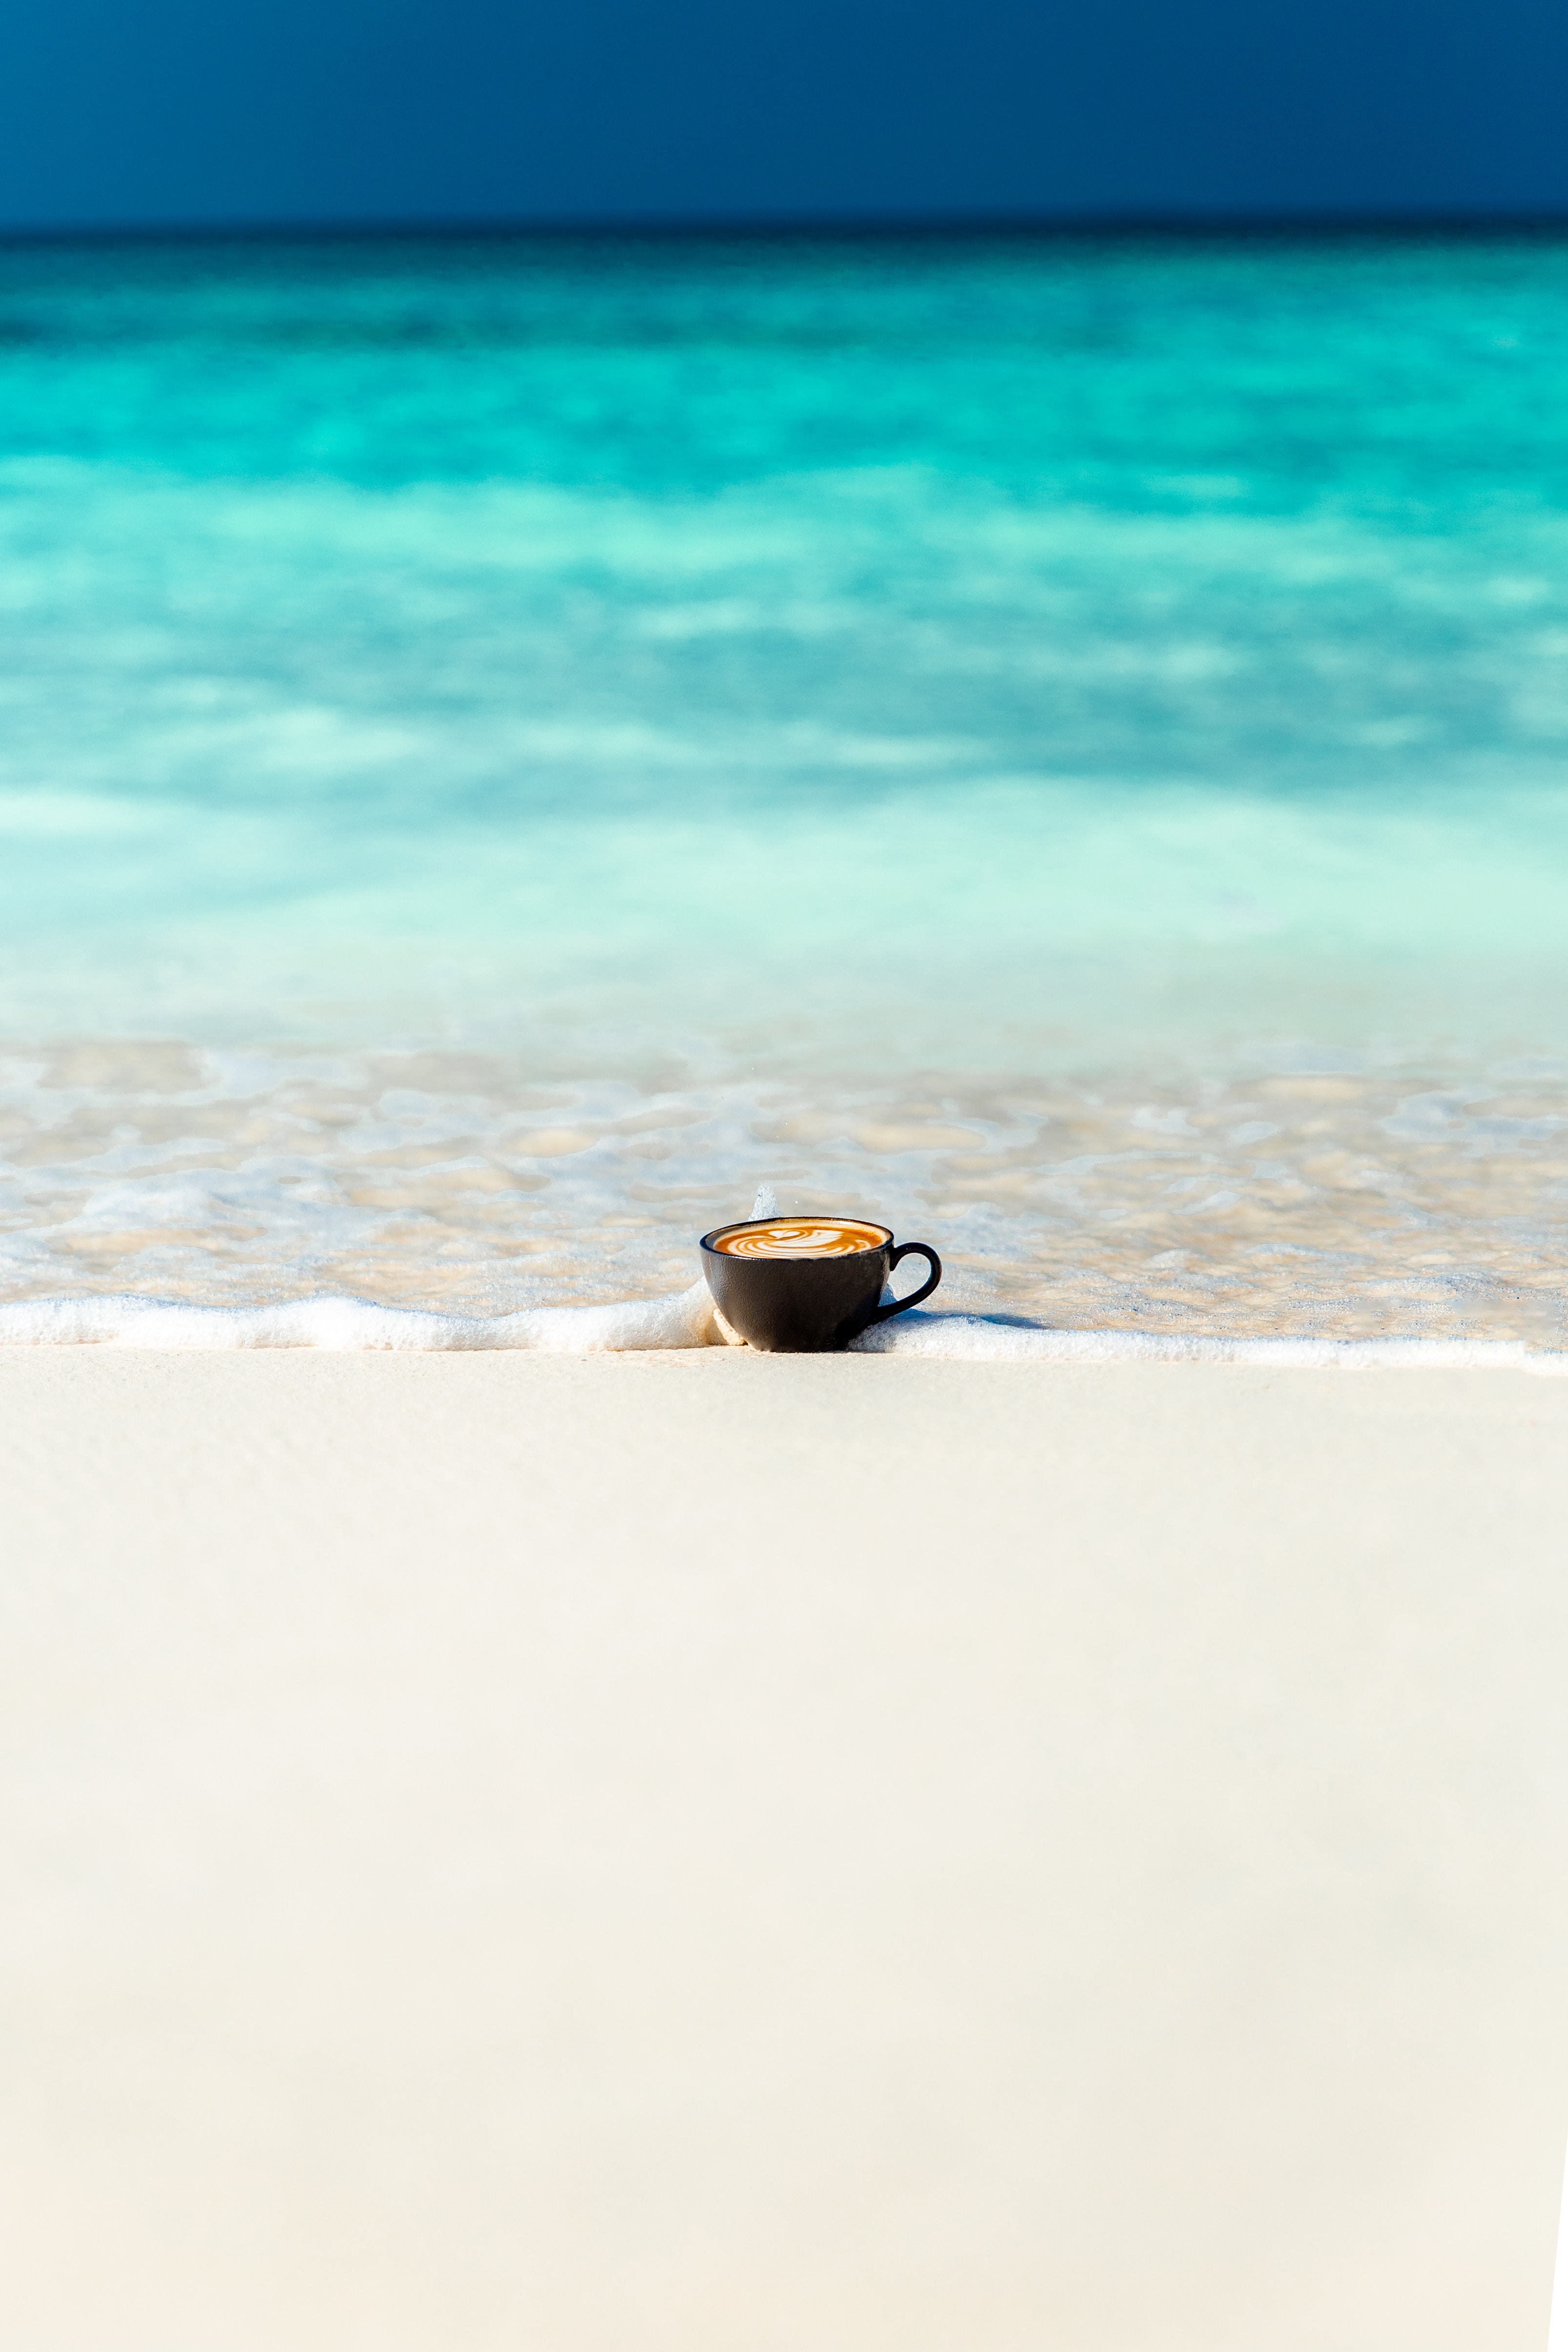 bank, minimalism, sand, shore, cup, ocean for android